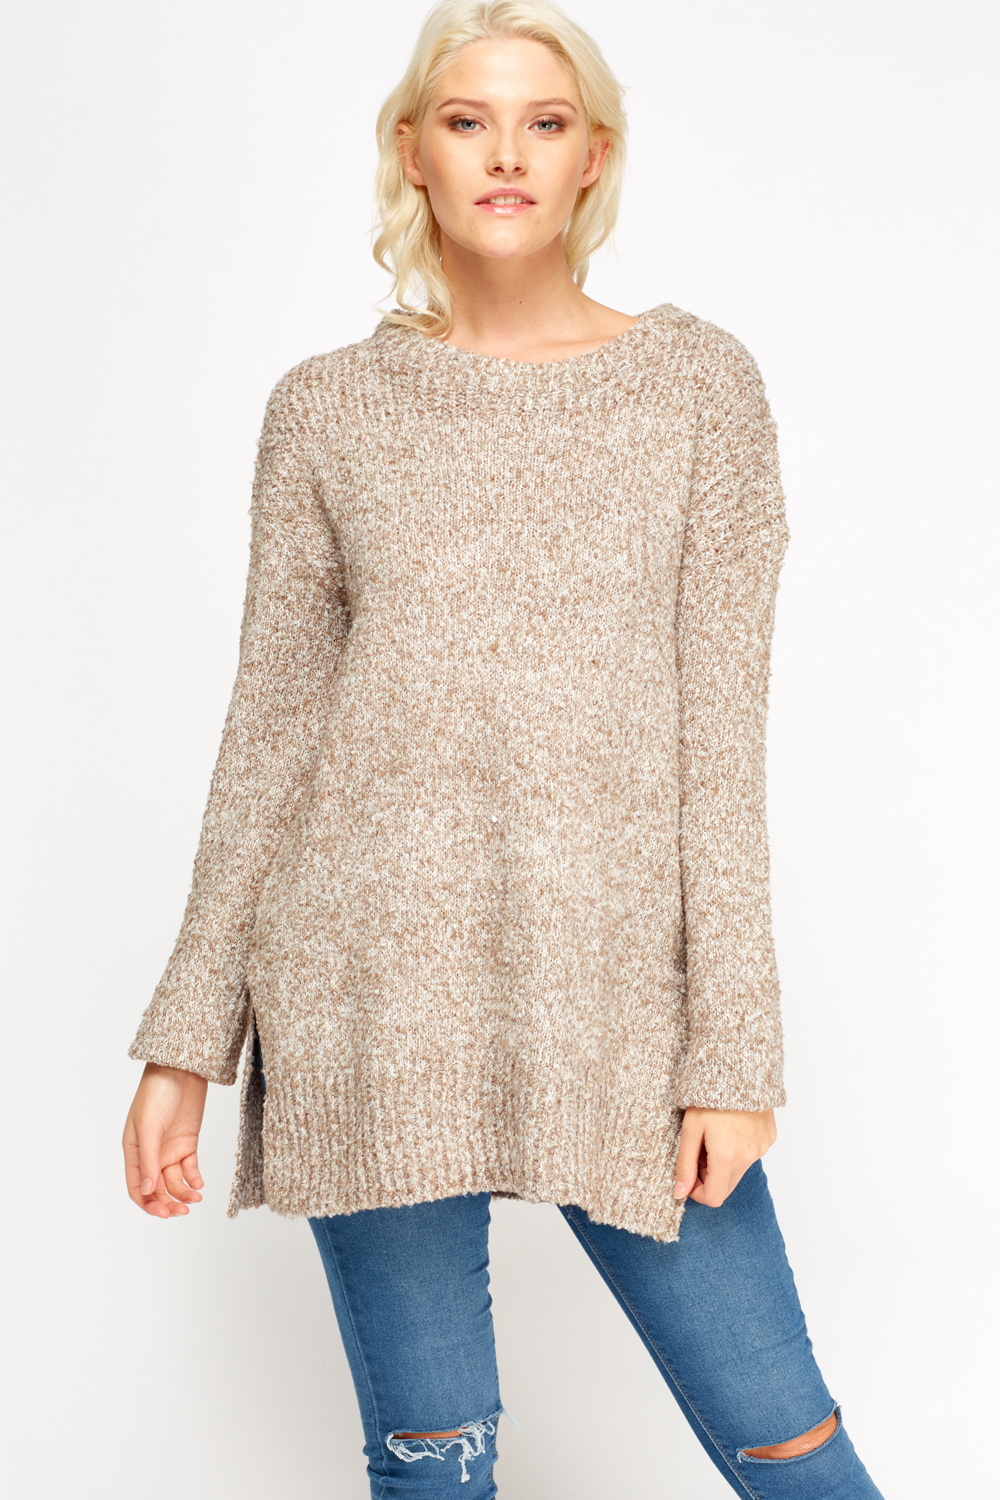 Booble Knit Speckled Jumper - Just $7